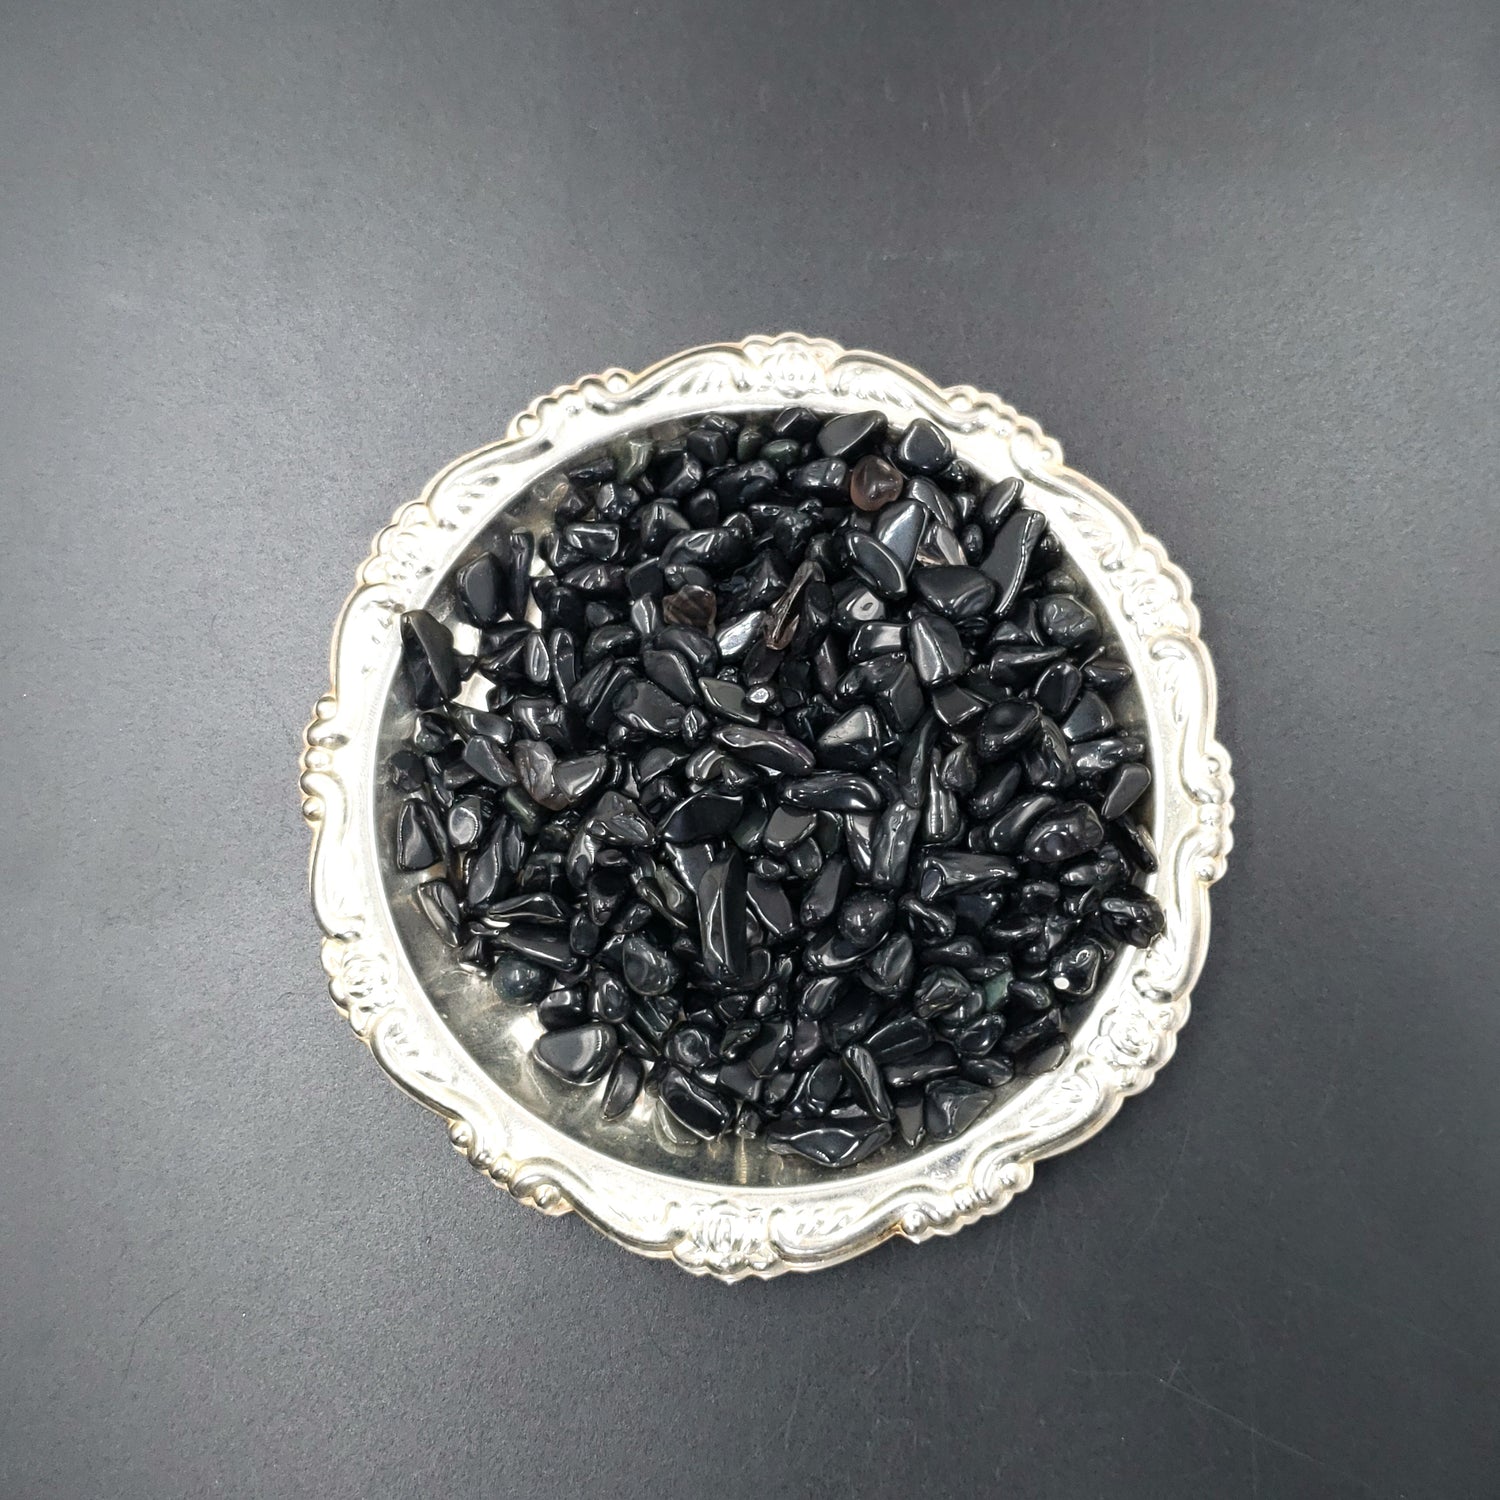 Black Tourmaline Chips - Elevated Metaphysical